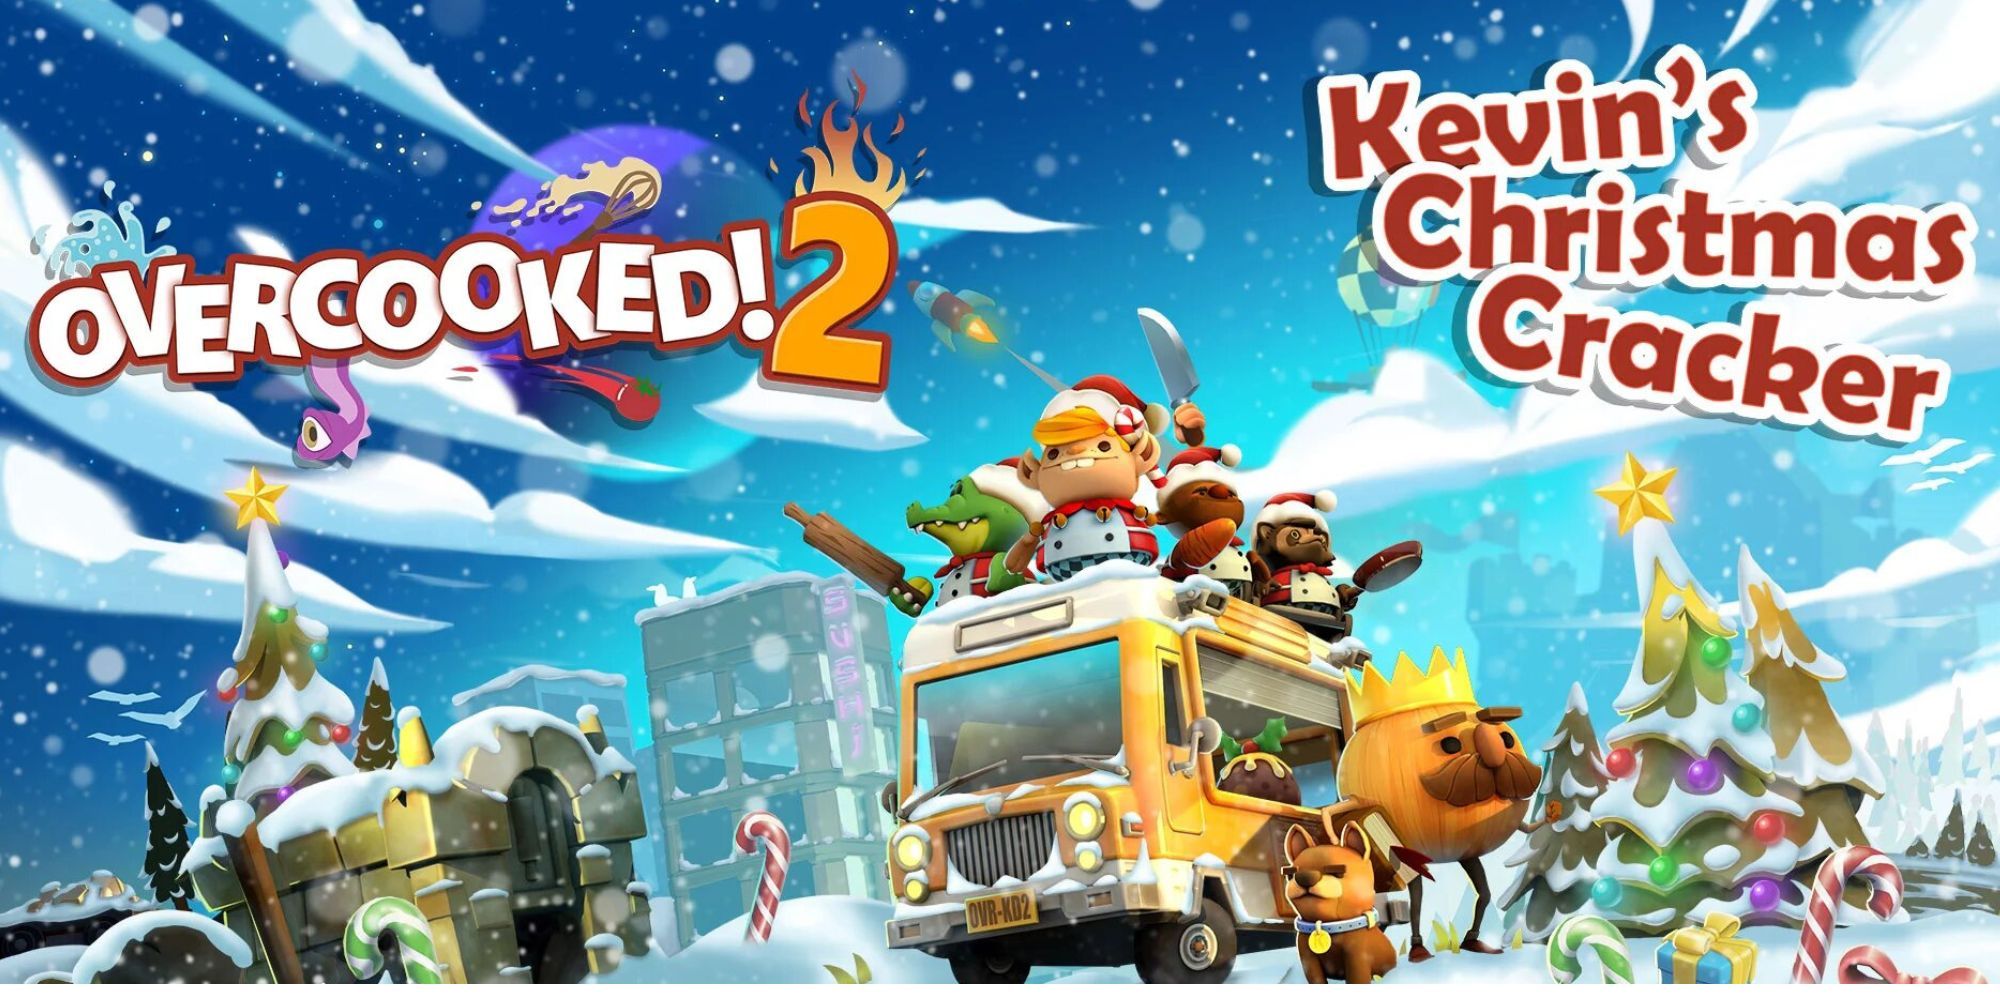 Overcooked! 2 - Kevin's Christmas Cracker Christmas Event - Christmas-themed Chefs On Food Truck